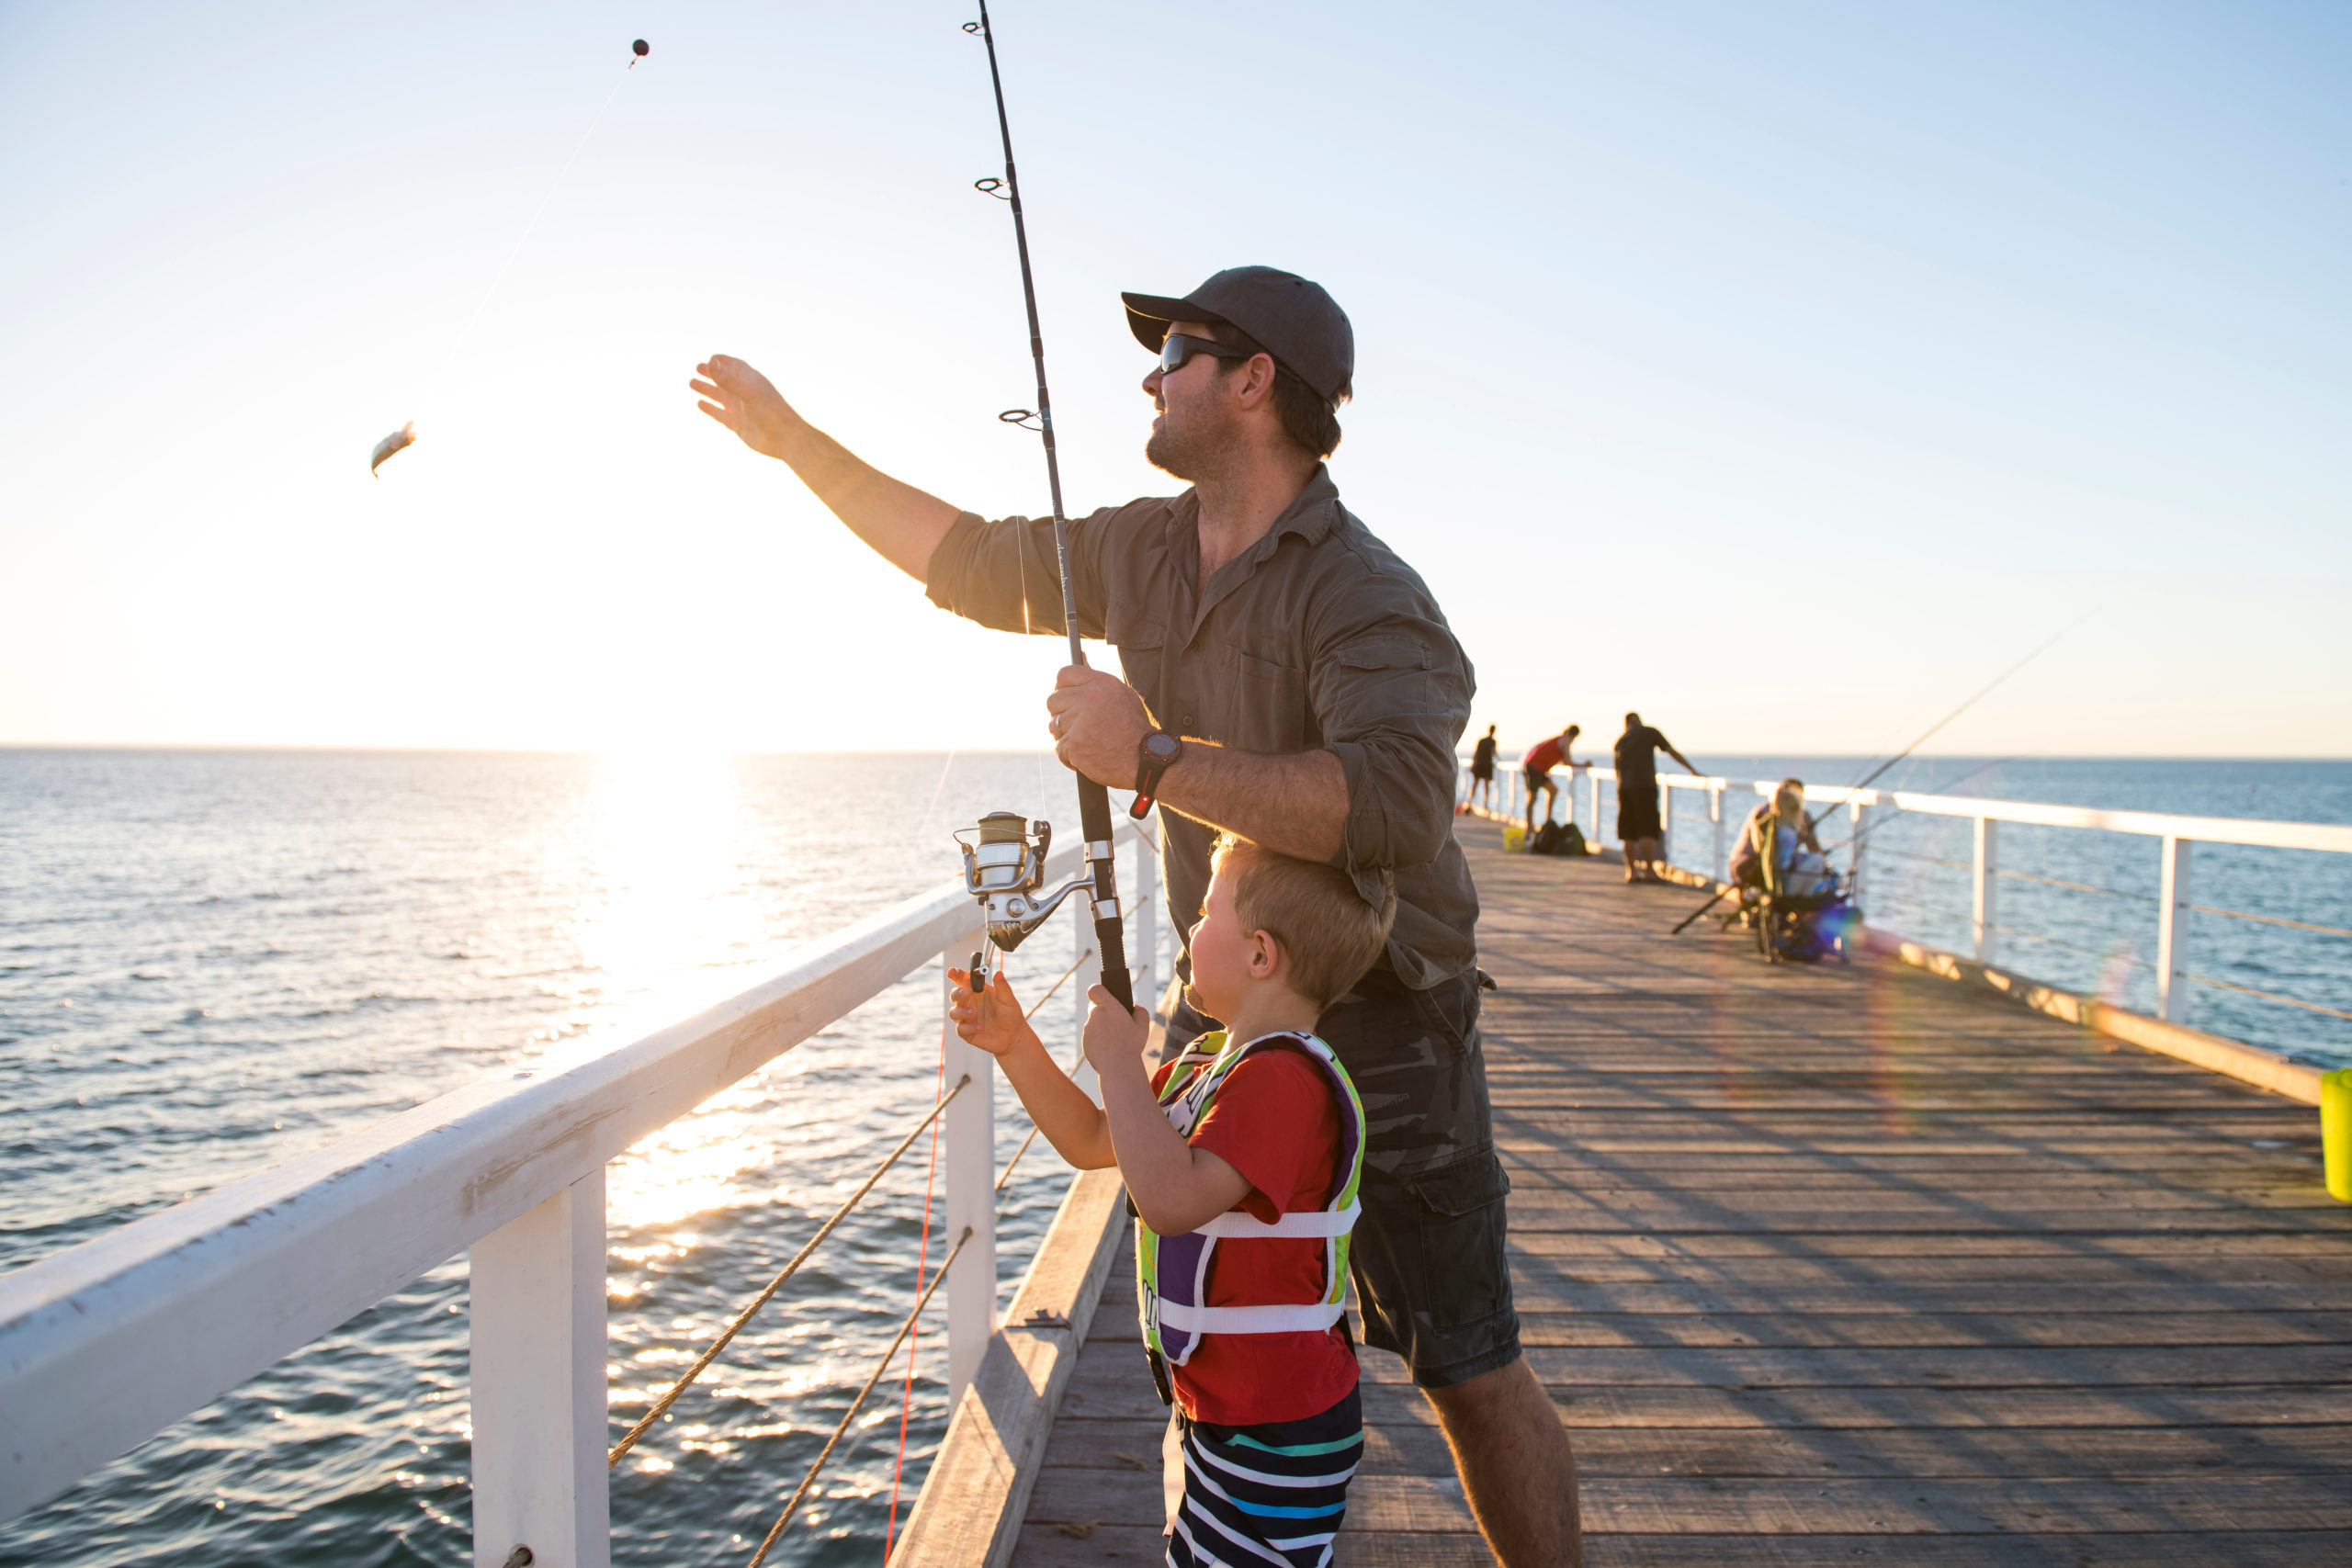 Best Tactics To Catch More Fish On Piers (When You're With Kids)